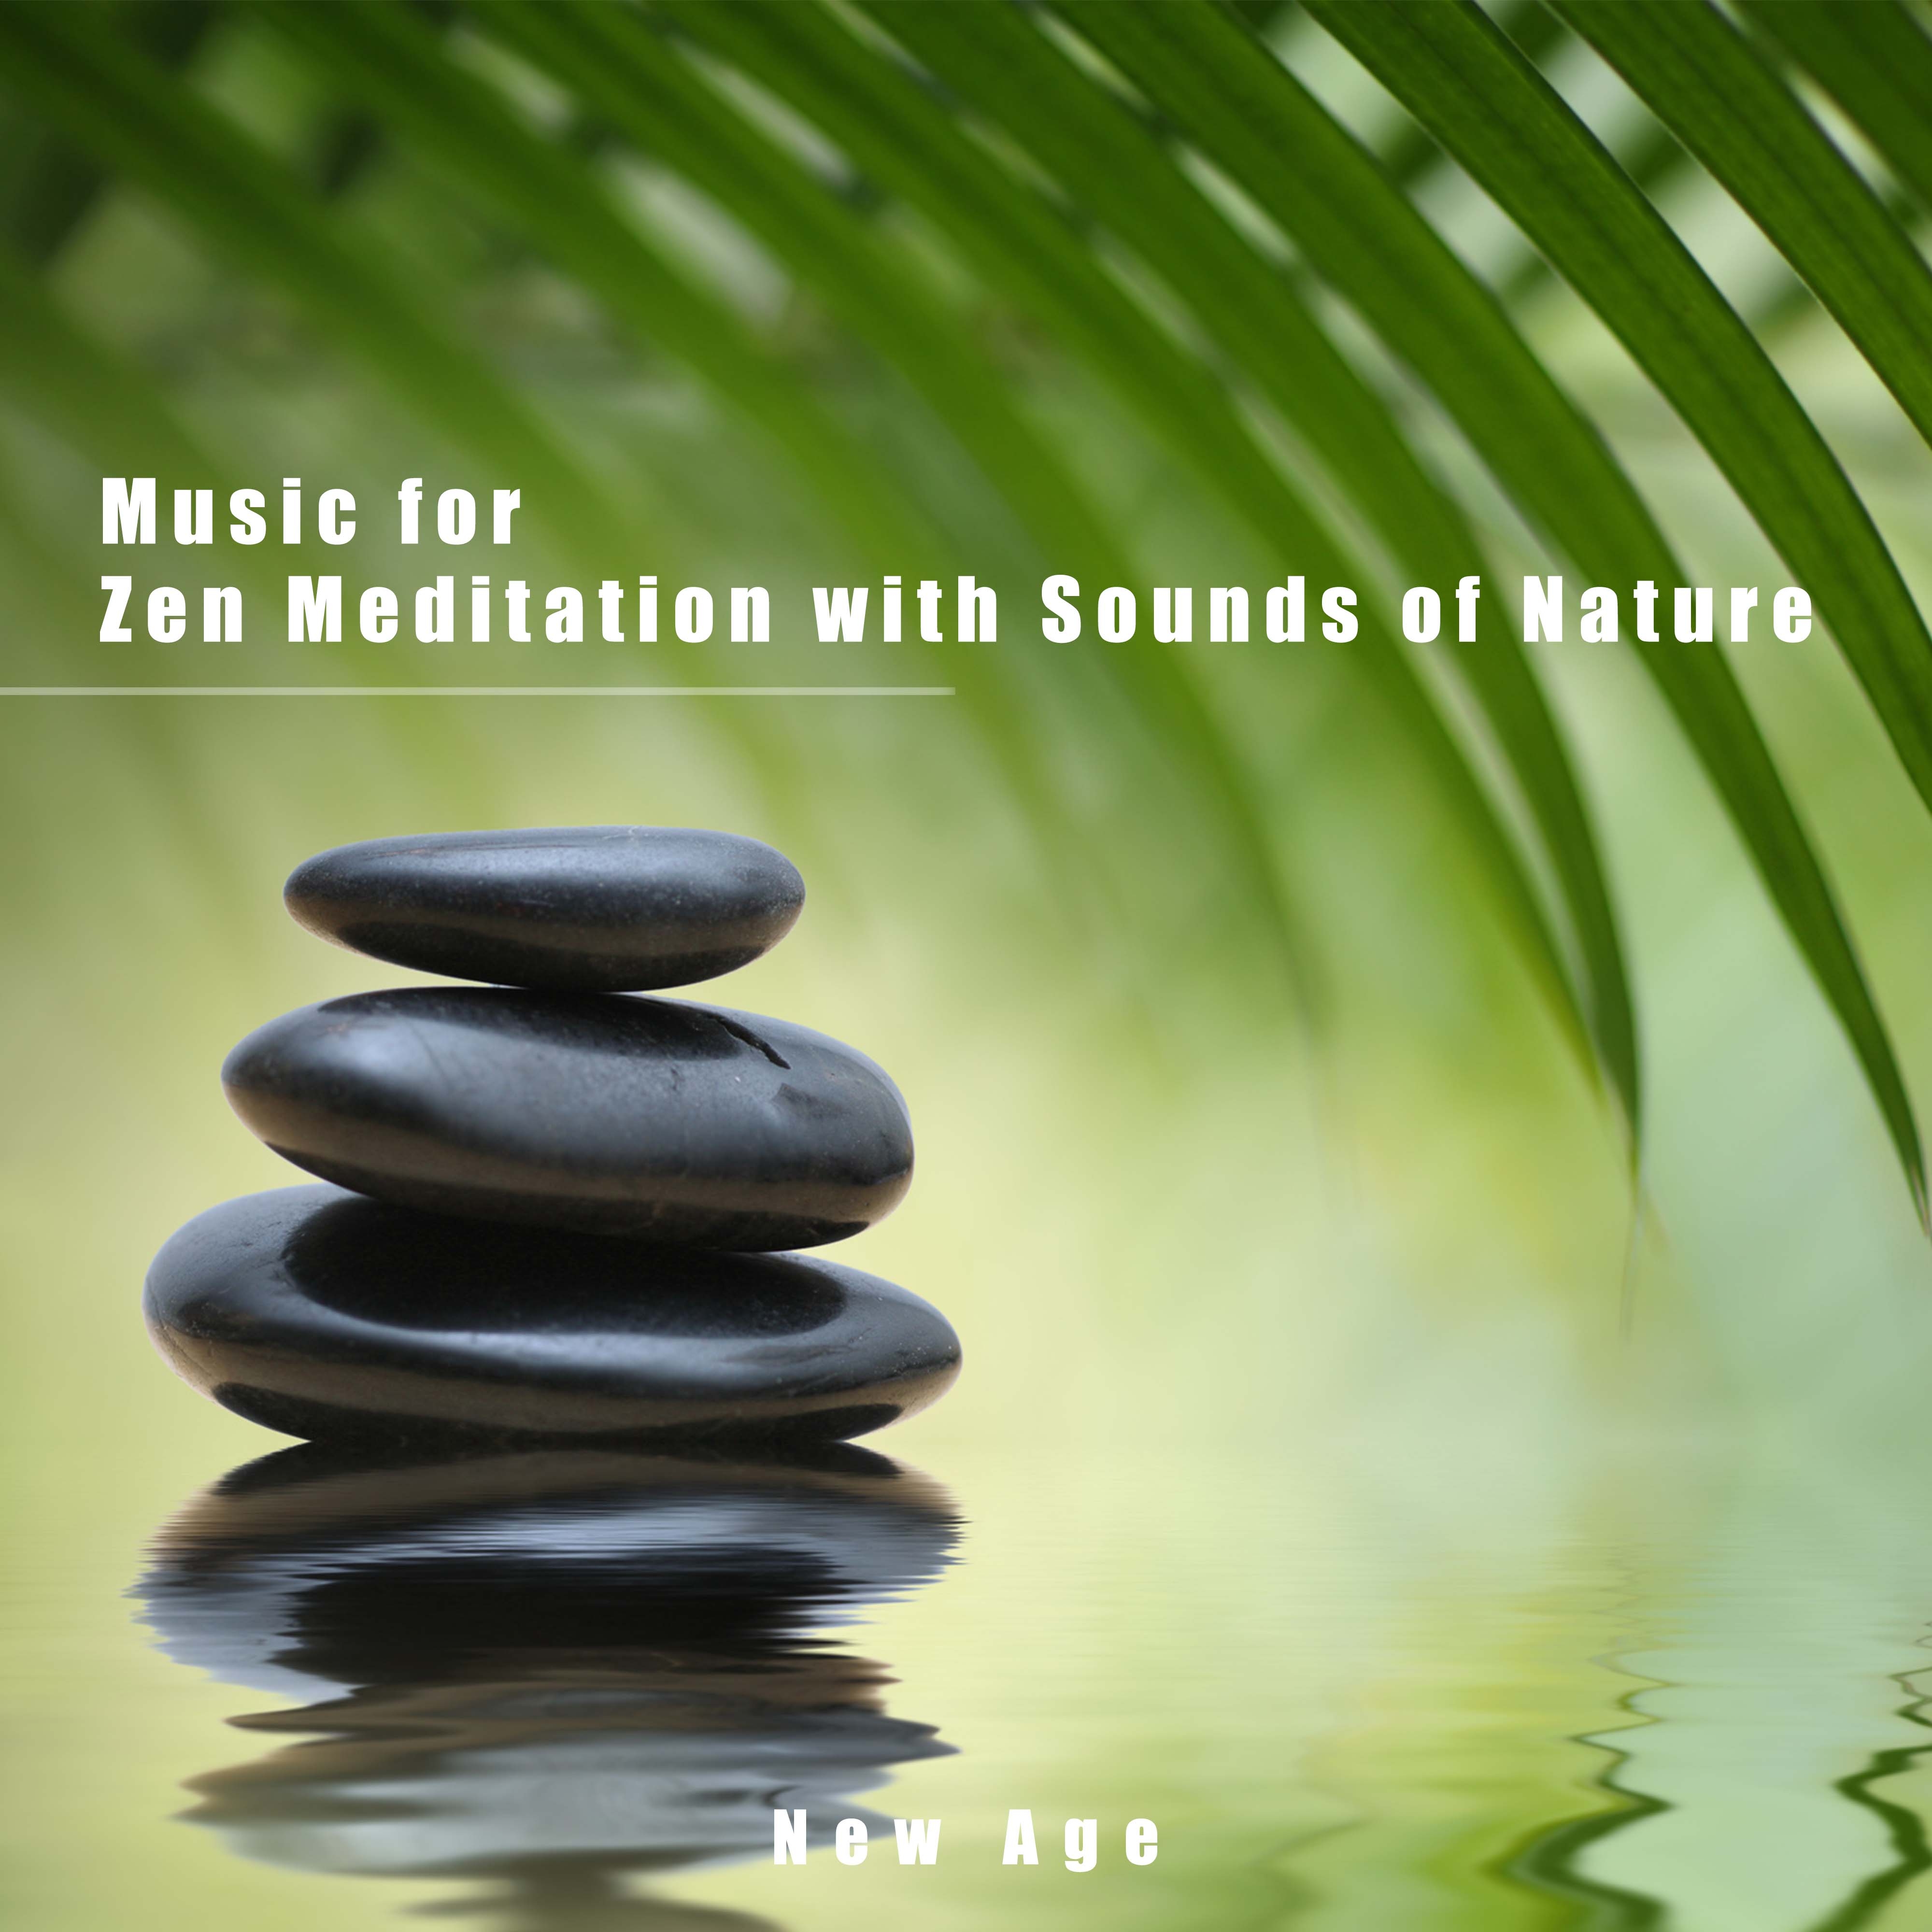 Music for Zen Meditation with Sounds of Nature